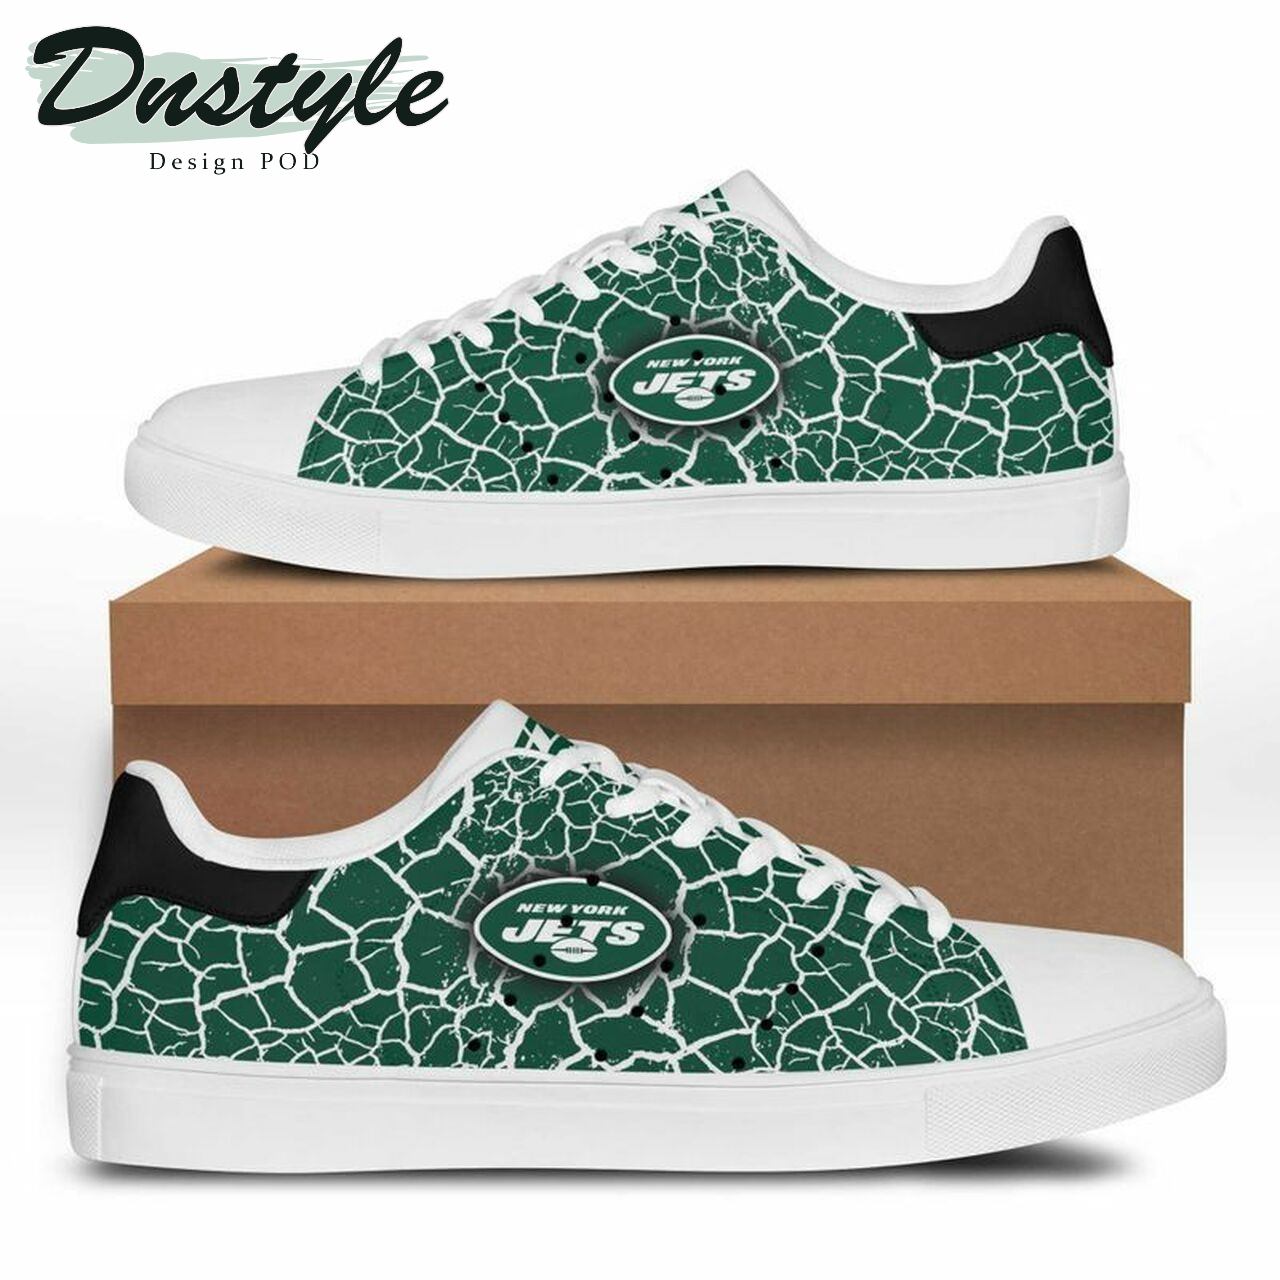 NFL new york jets stan smith low top skate shoes